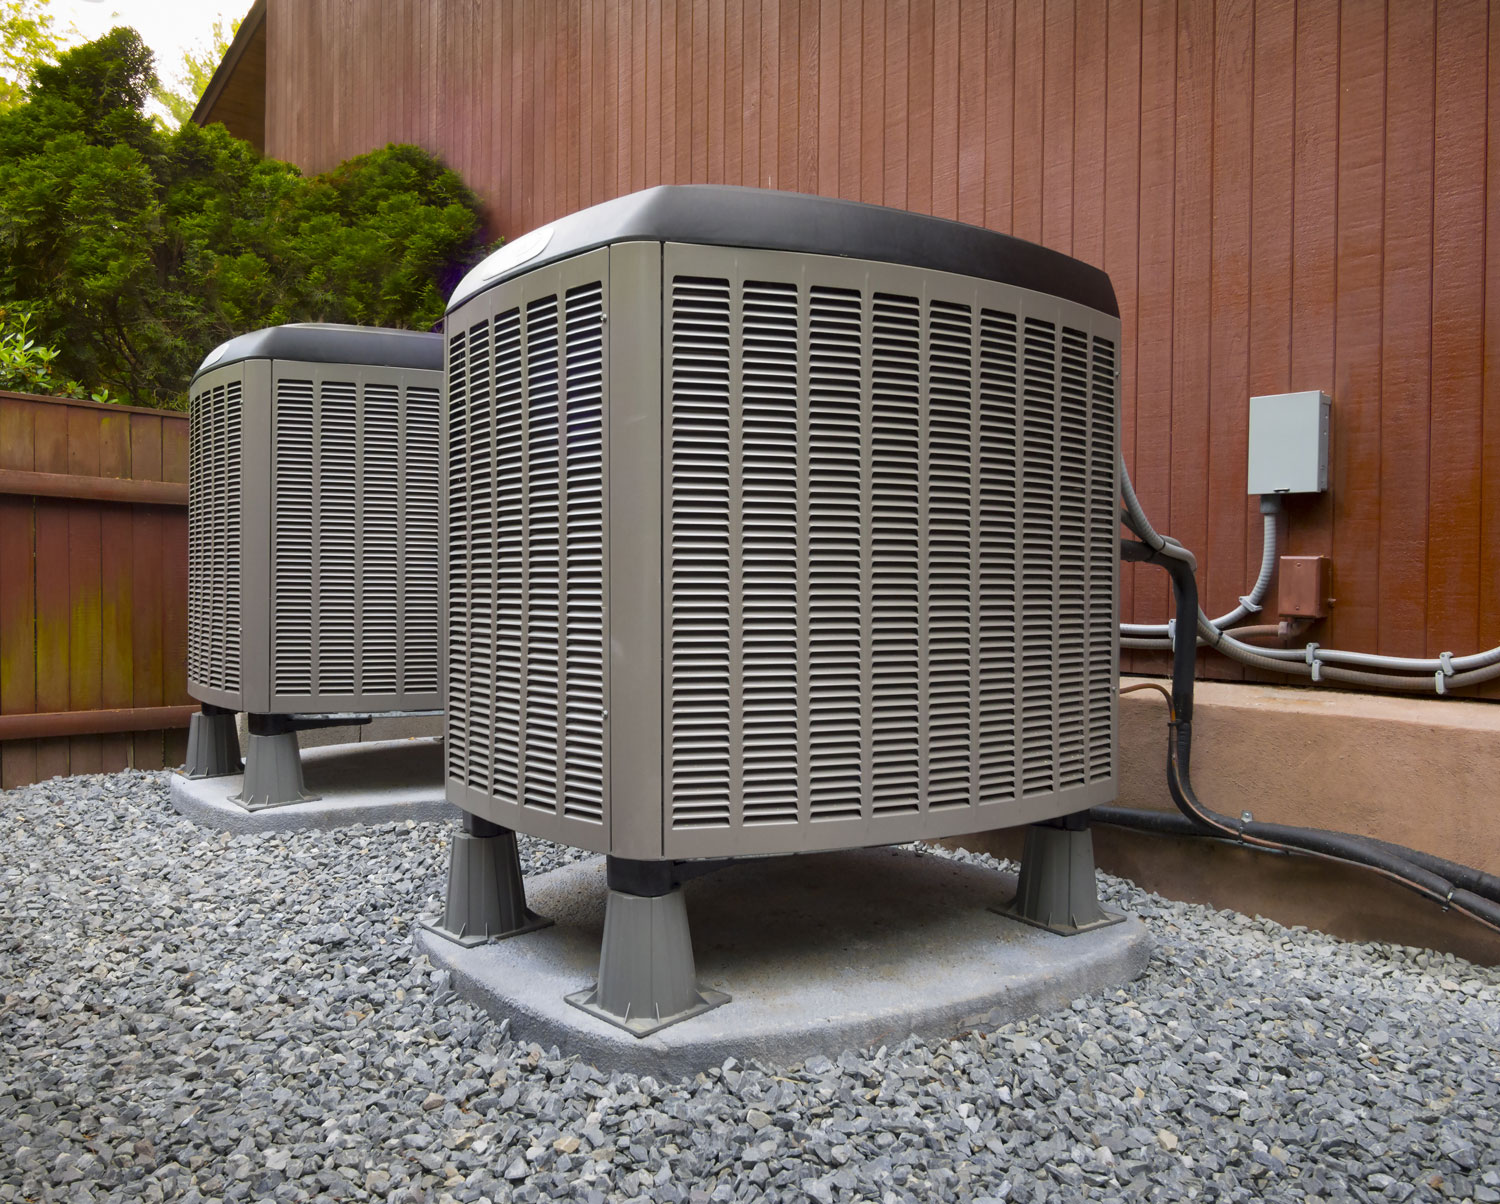 Day and Night HVAC unit - Temper Mechanical